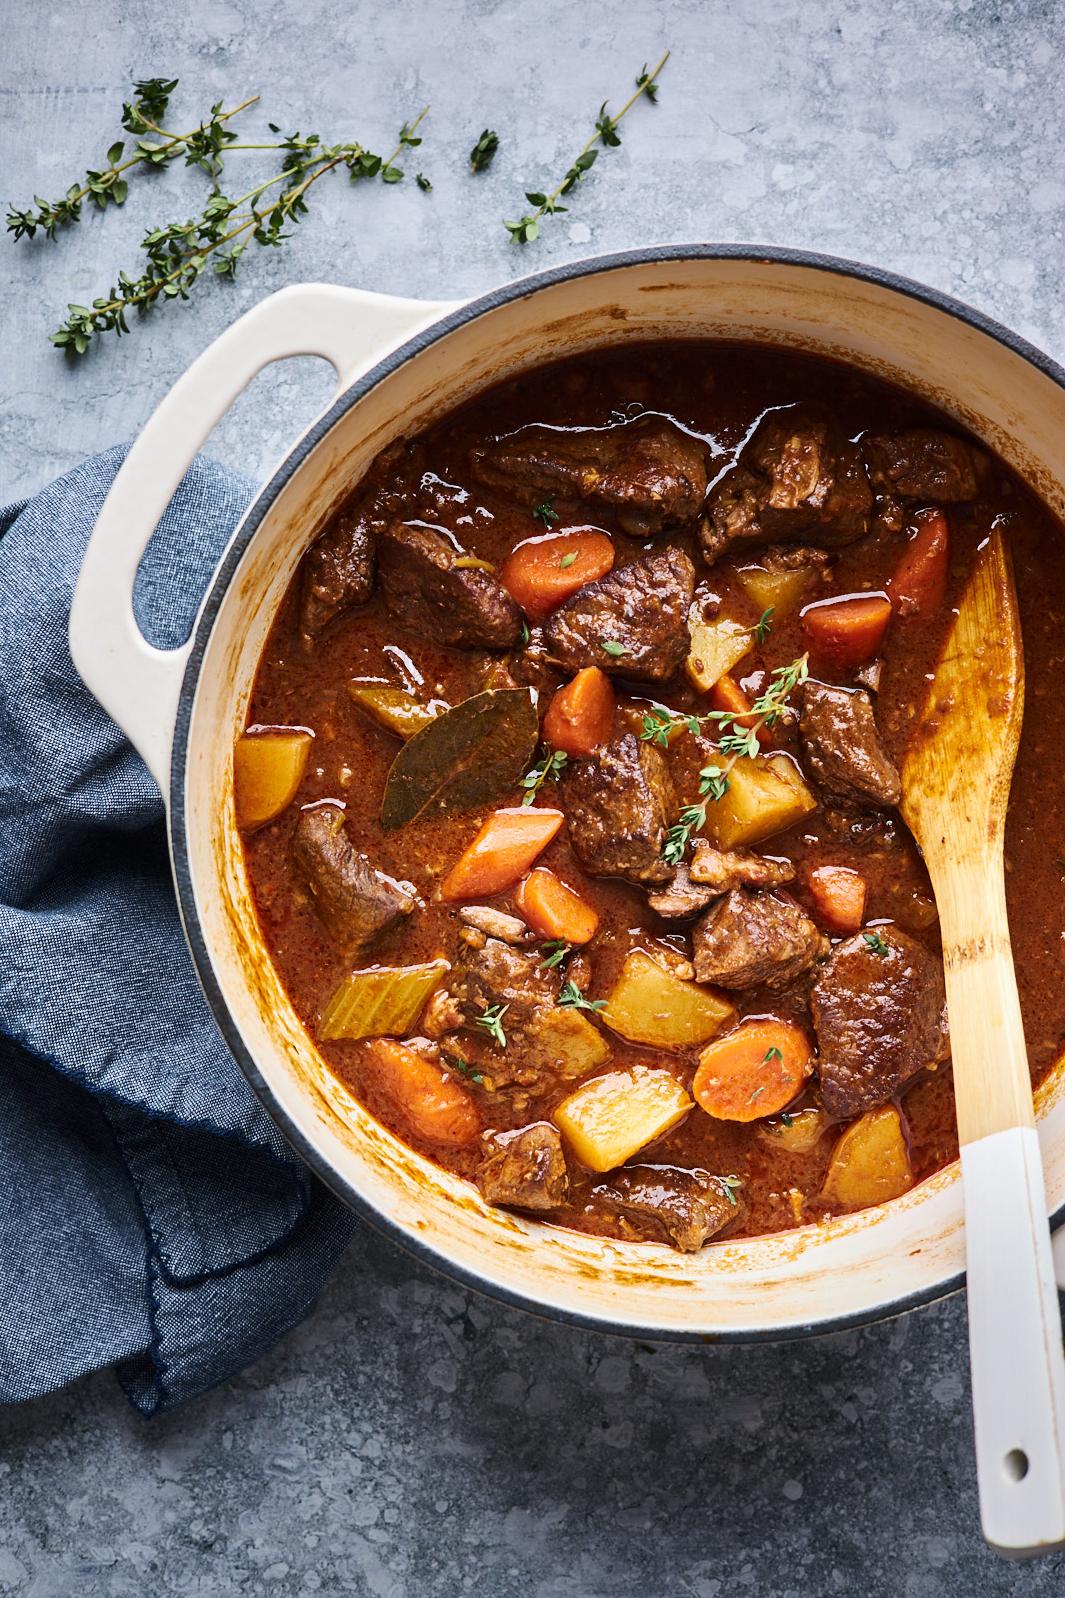  A hearty stew to warm up your cold winter nights!